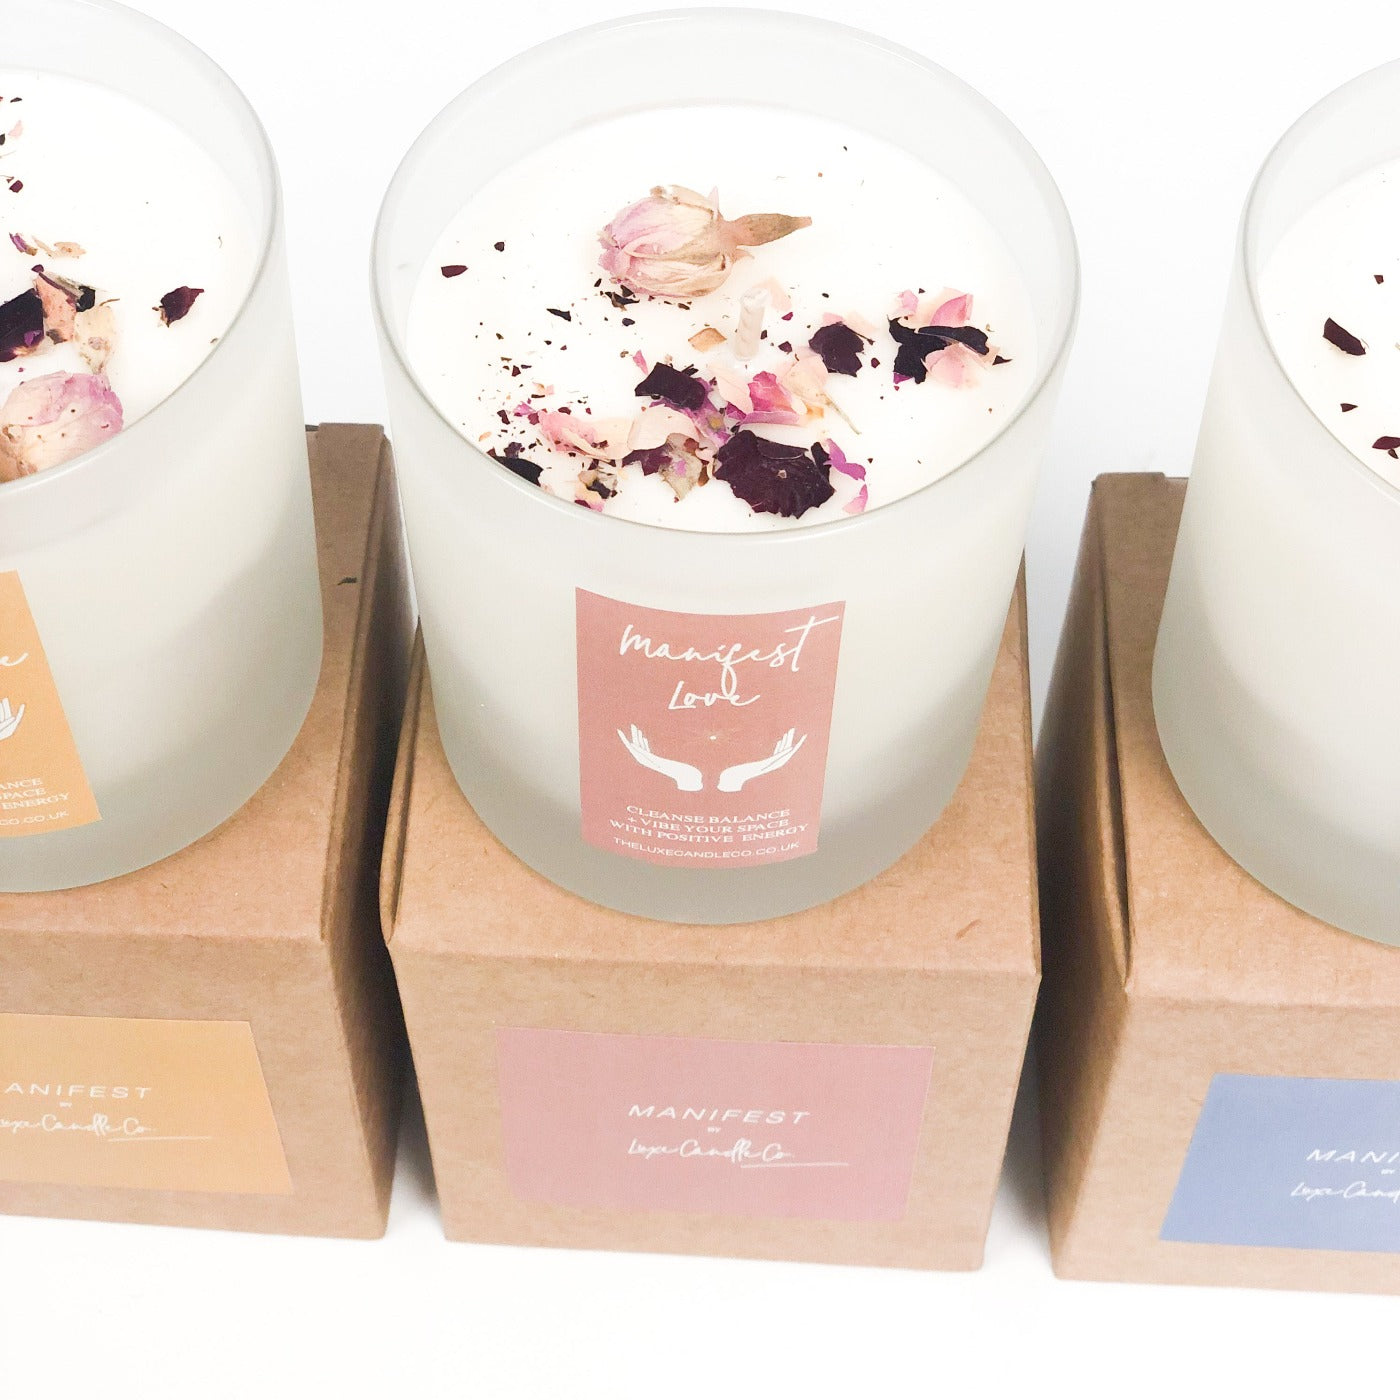 Manifesting Candles | The Luxe Candle Co